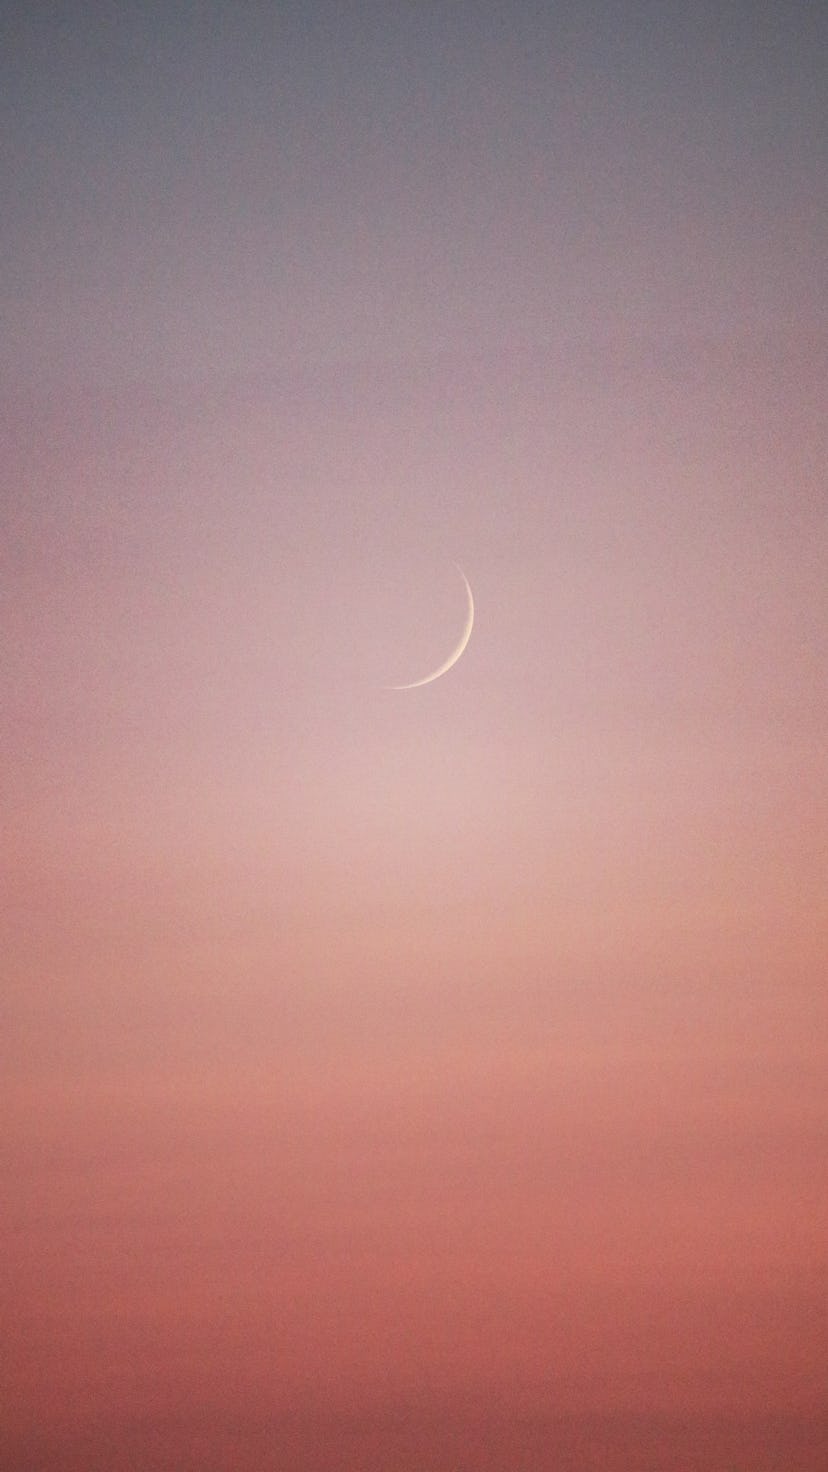 The young moon is setting during a beautiful sunrise. June 2022 new moon do's and don'ts.